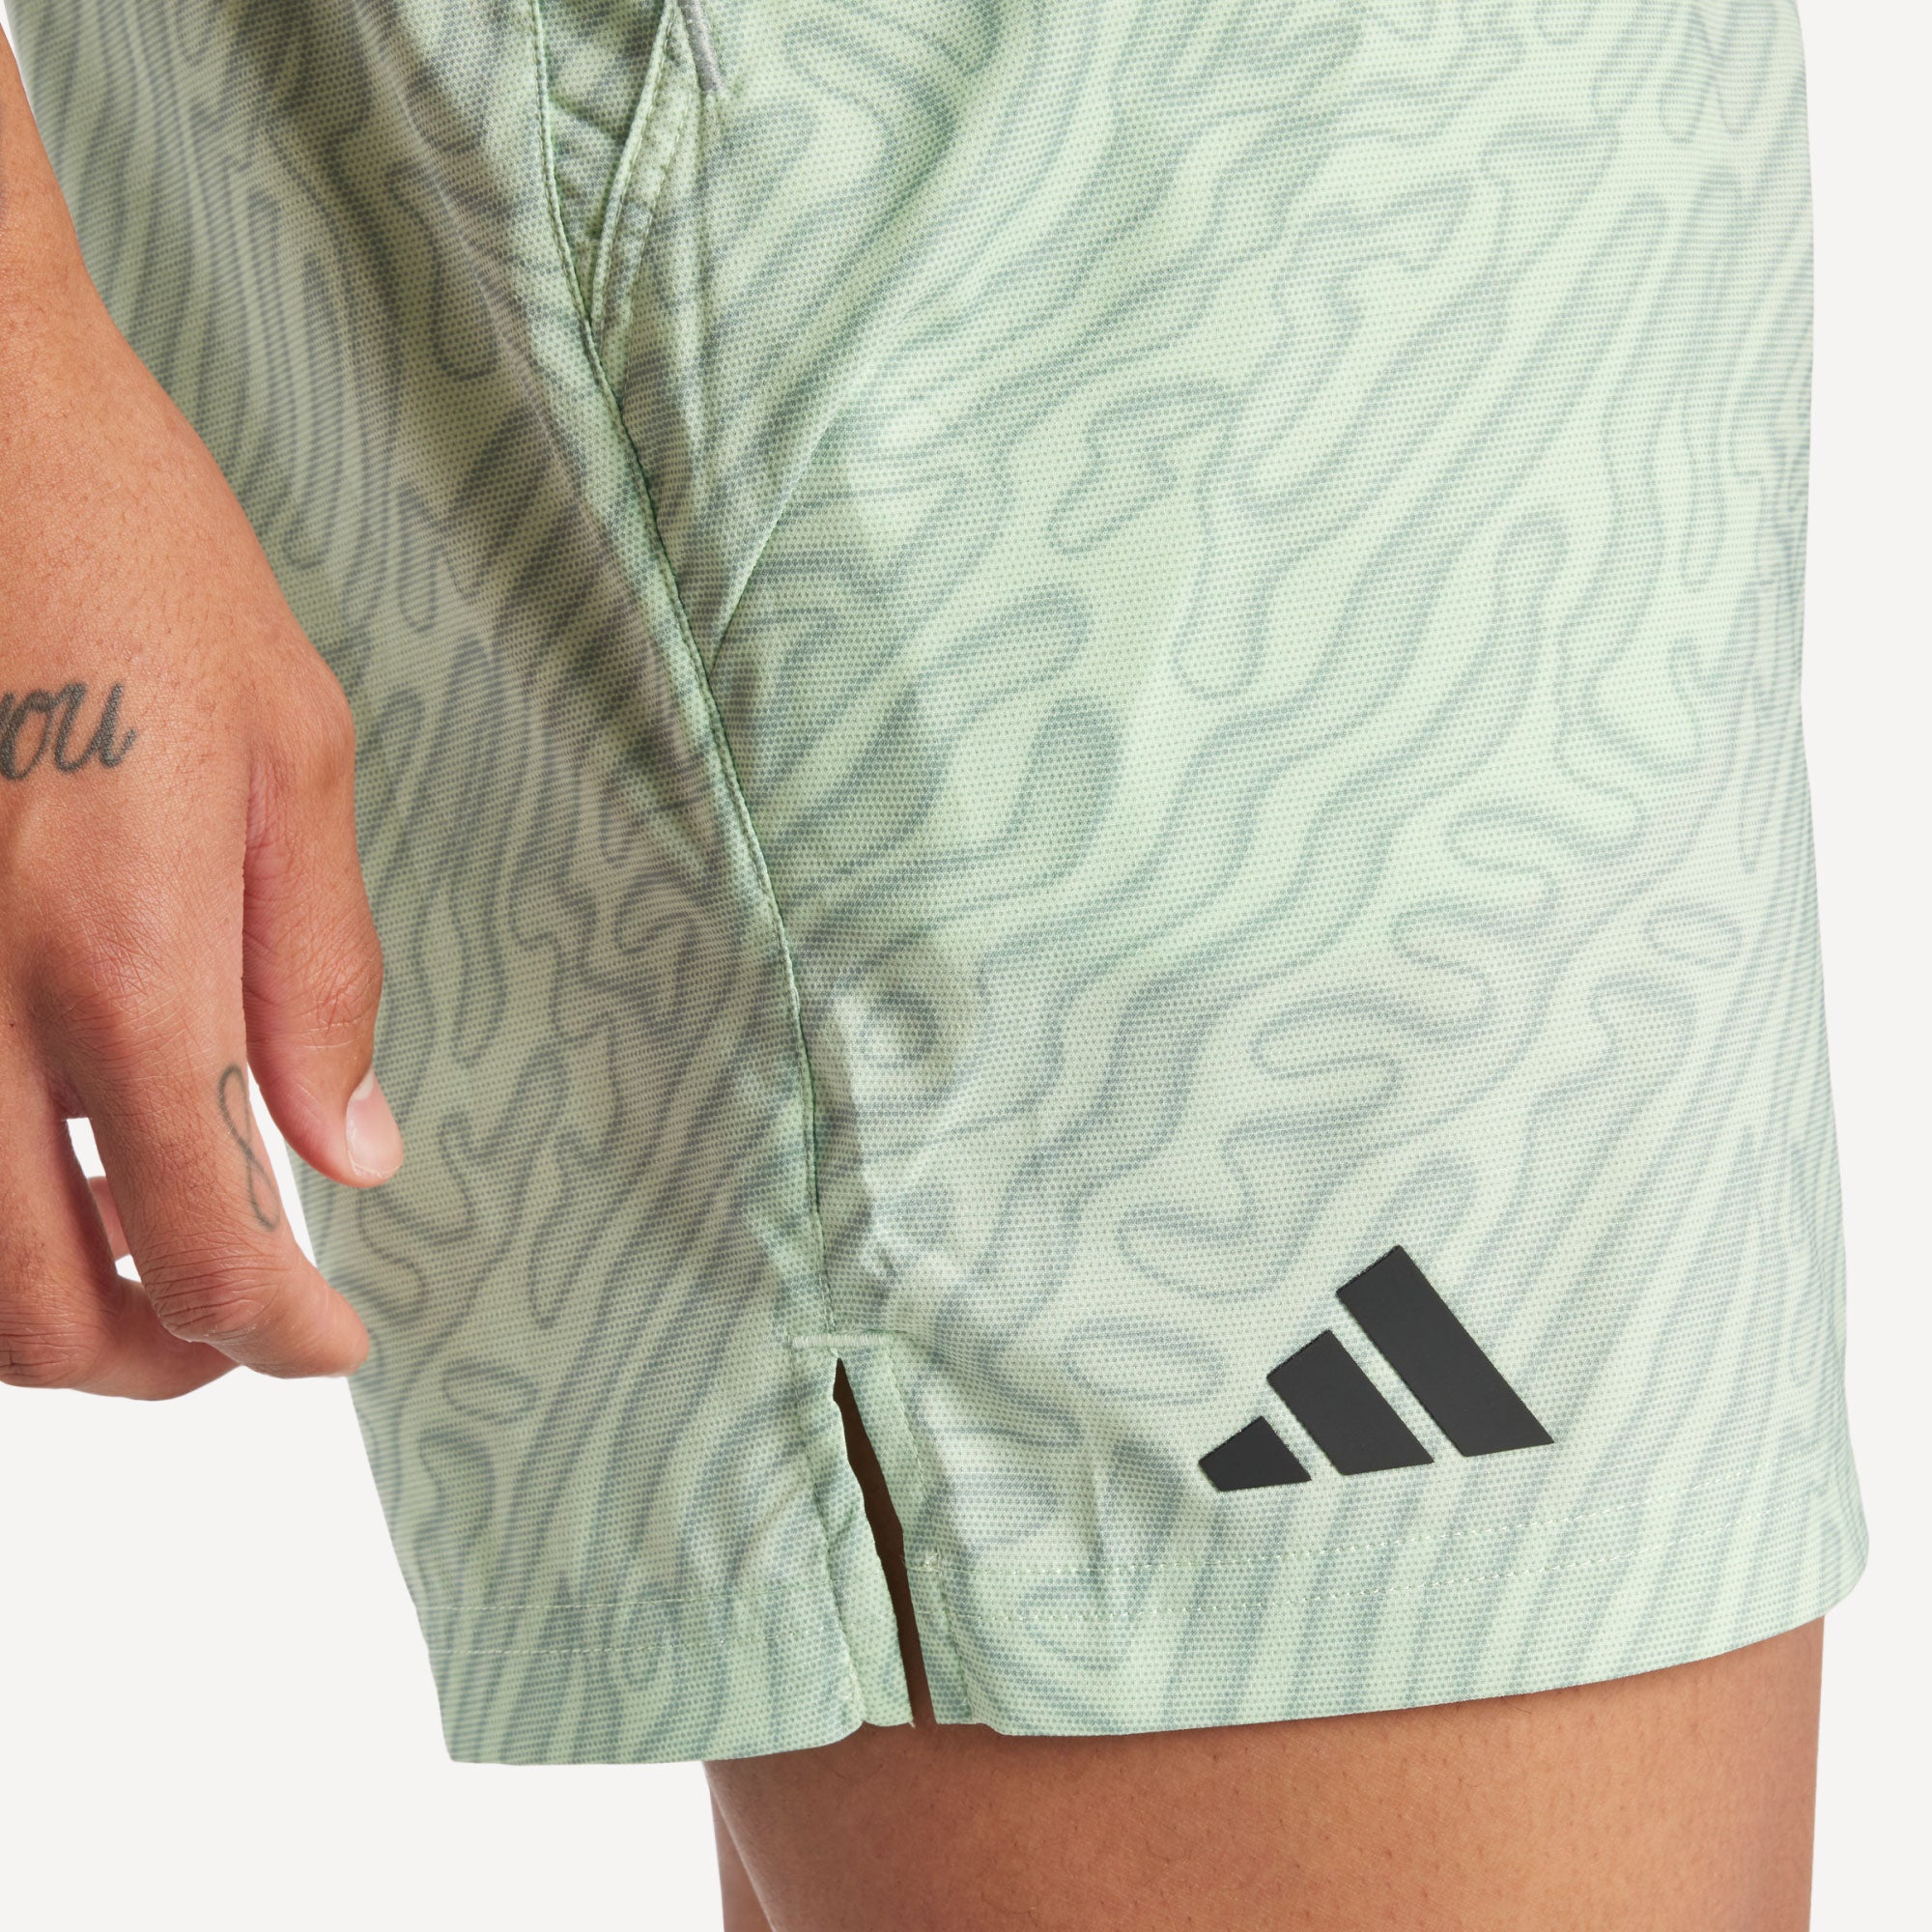 adidas Pro Melbourne Men's Printed 7-Inch Tennis Shorts - Green (5)